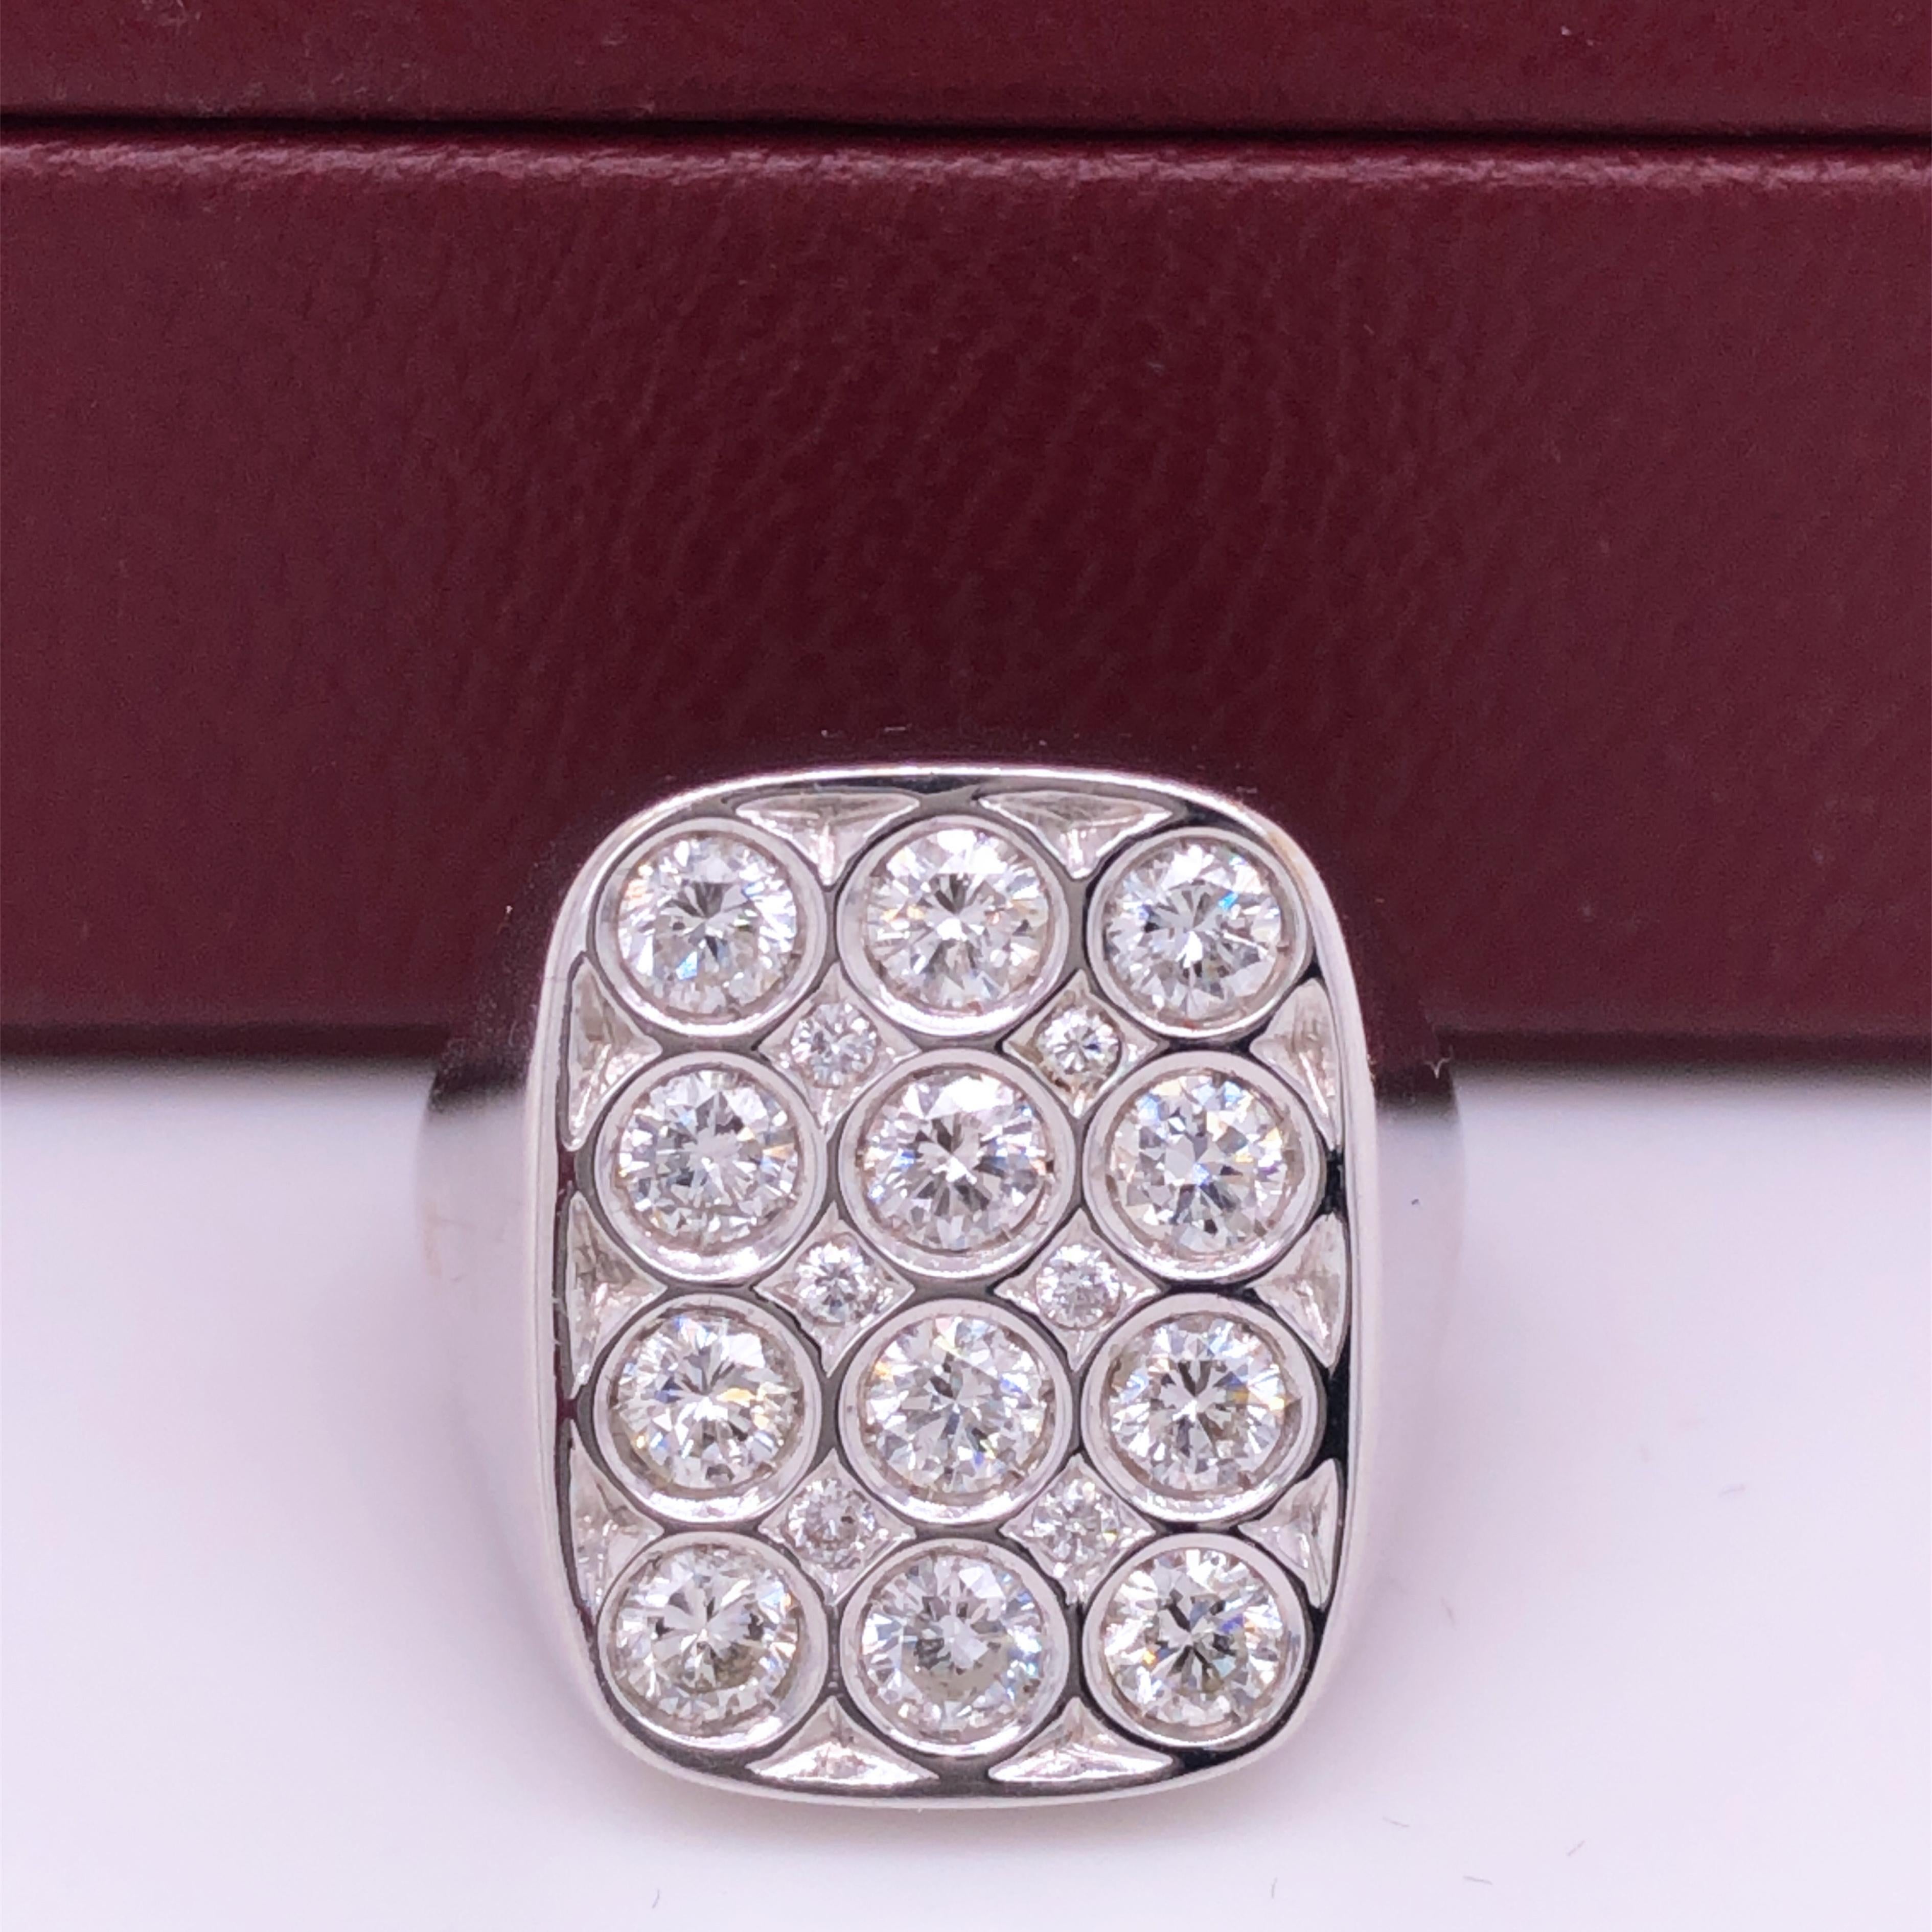 Chic yet Unique Contemporary Cocktail Ring featuring 1.56, 18 (D-E, IF) White Diamond Brilliant Cut, in a Minimalist, Refined 18Kt Mirror Finish White Gold Setting.
Us Size 6 1/2, French Size 53.
In our fitted burgundy leather case.

We are pleased